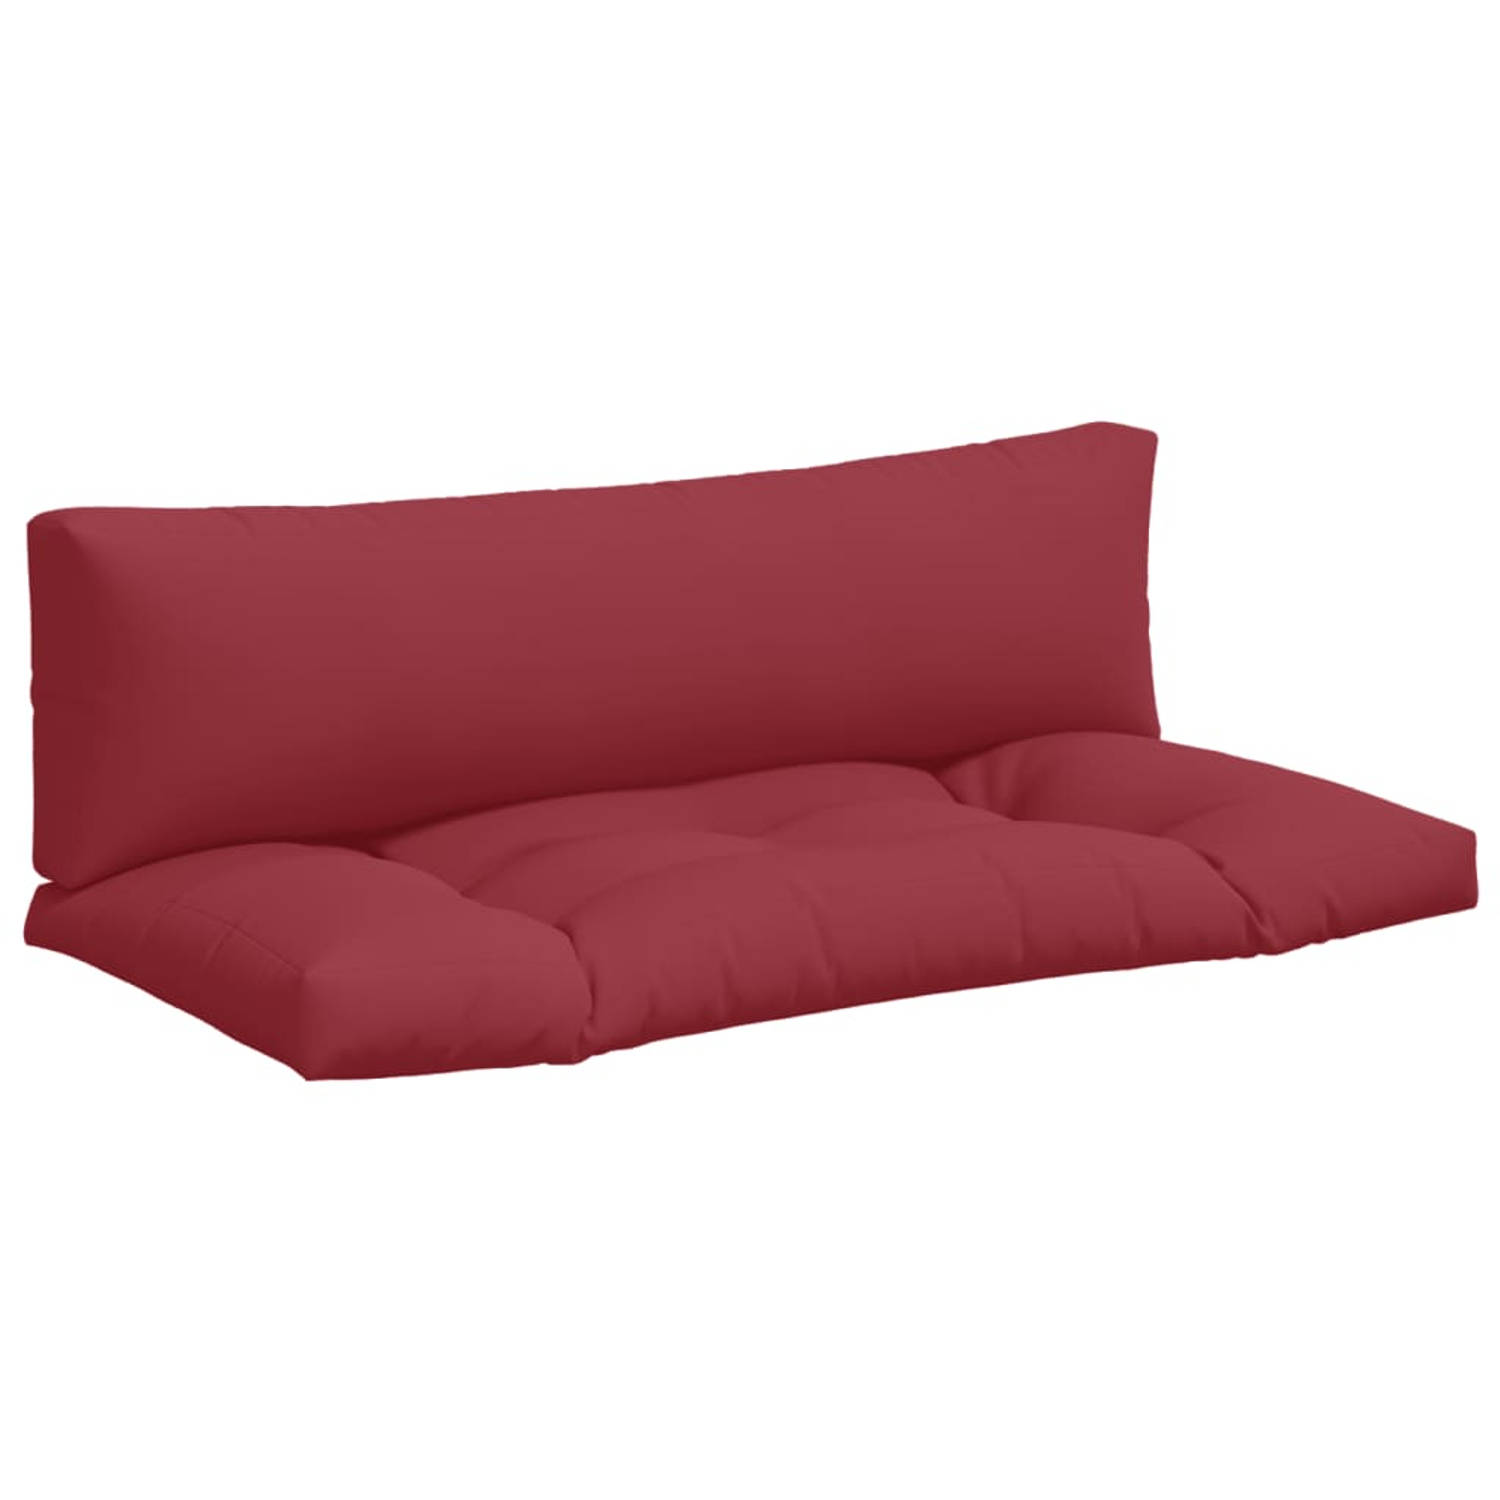 The Living Store - Comfortabele palletkussens - 110 x 58 cm - Rood